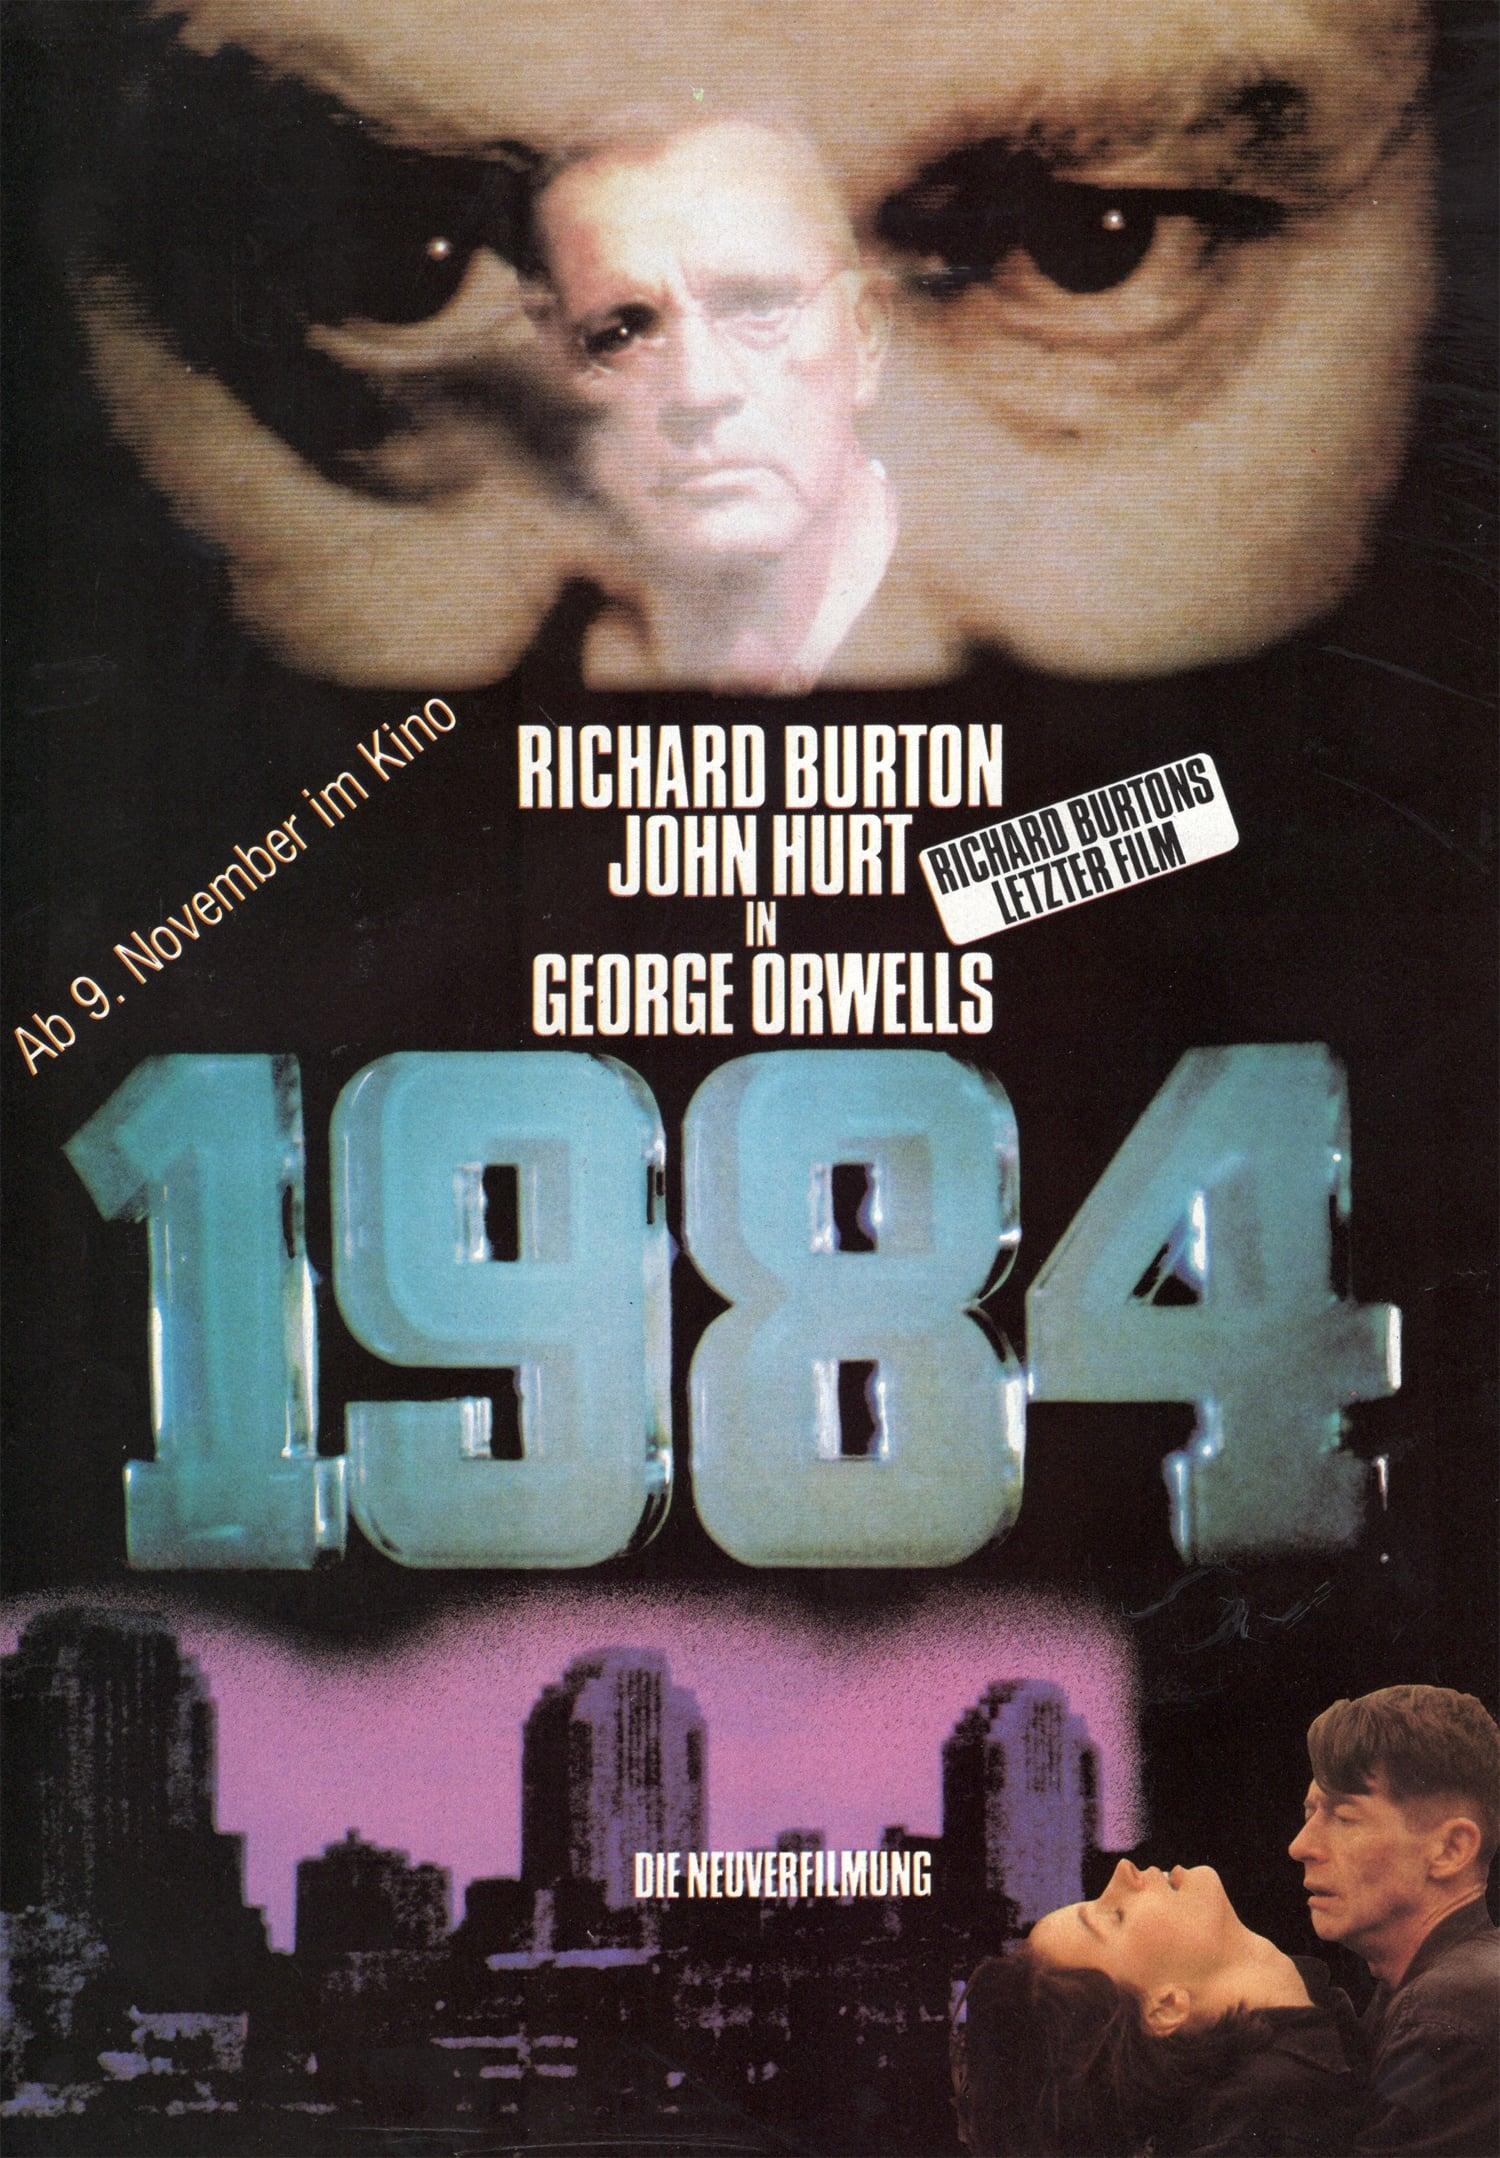 1984 poster